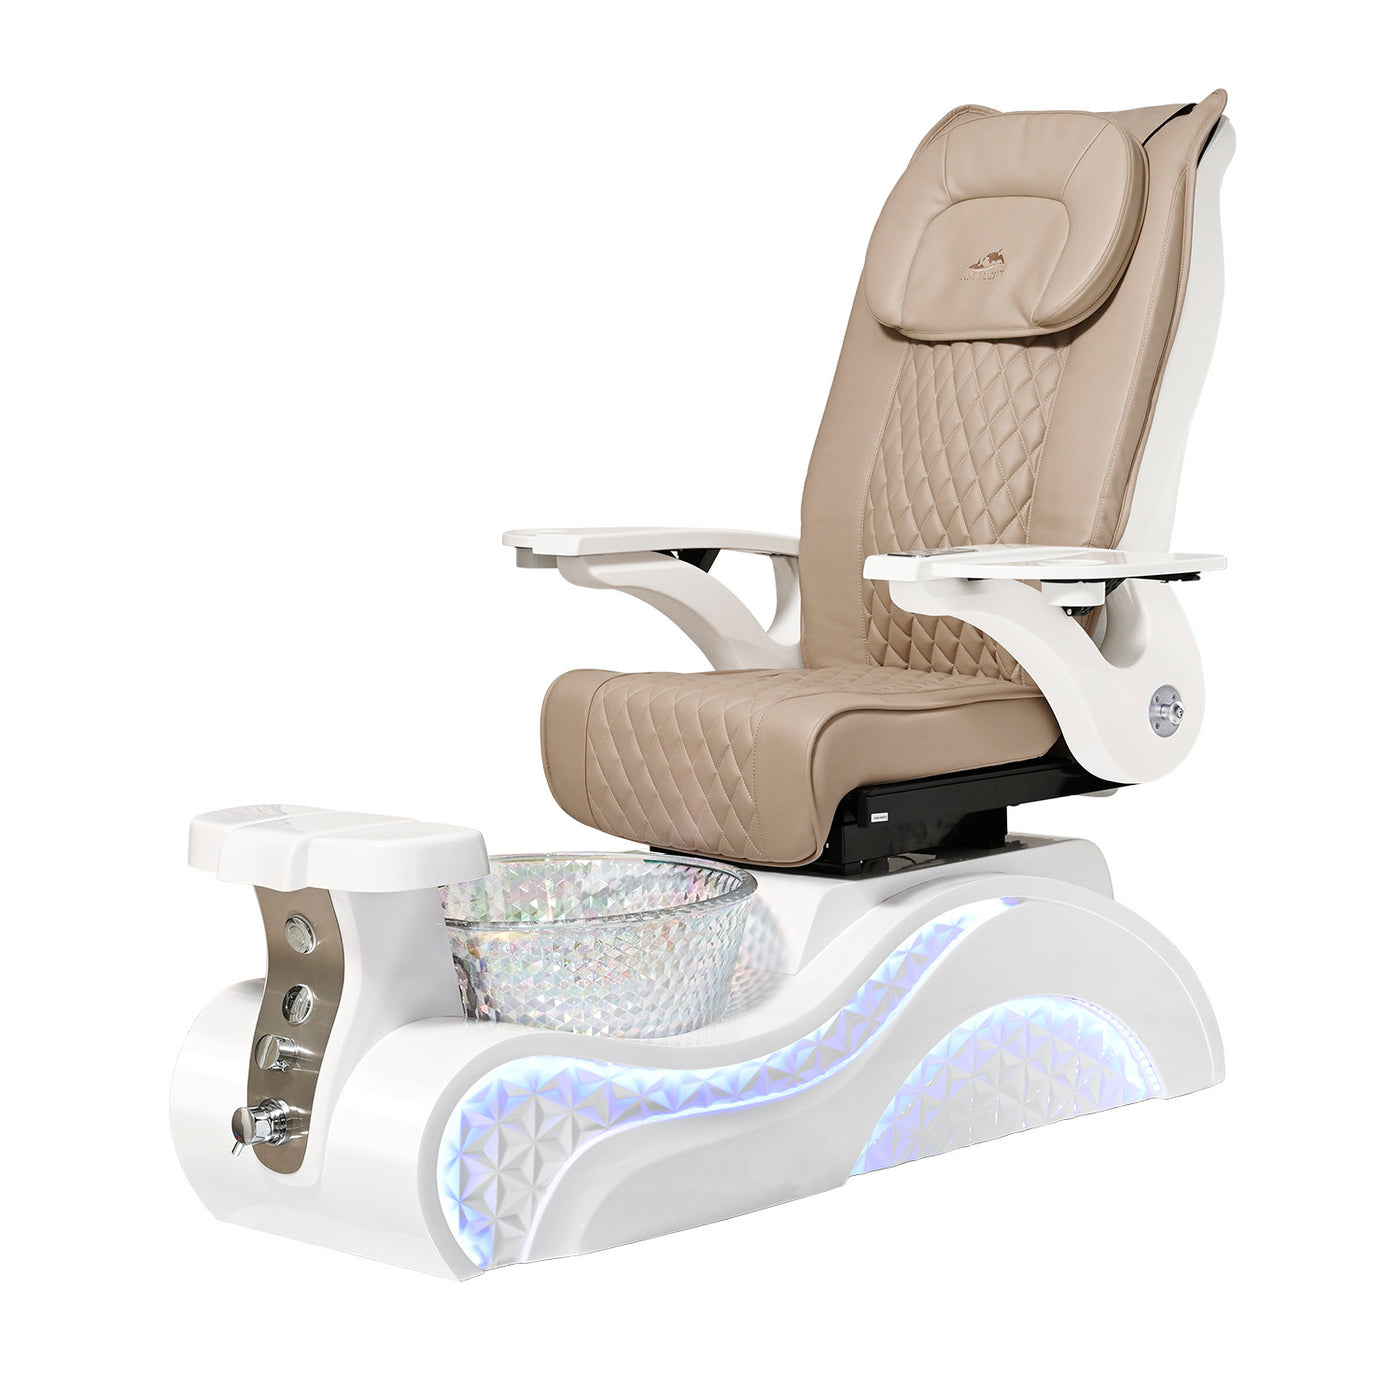 Lucent II Pedicure Chair. Khaki Seat, White Armrest, White Base & Crystal Glass Bowl 